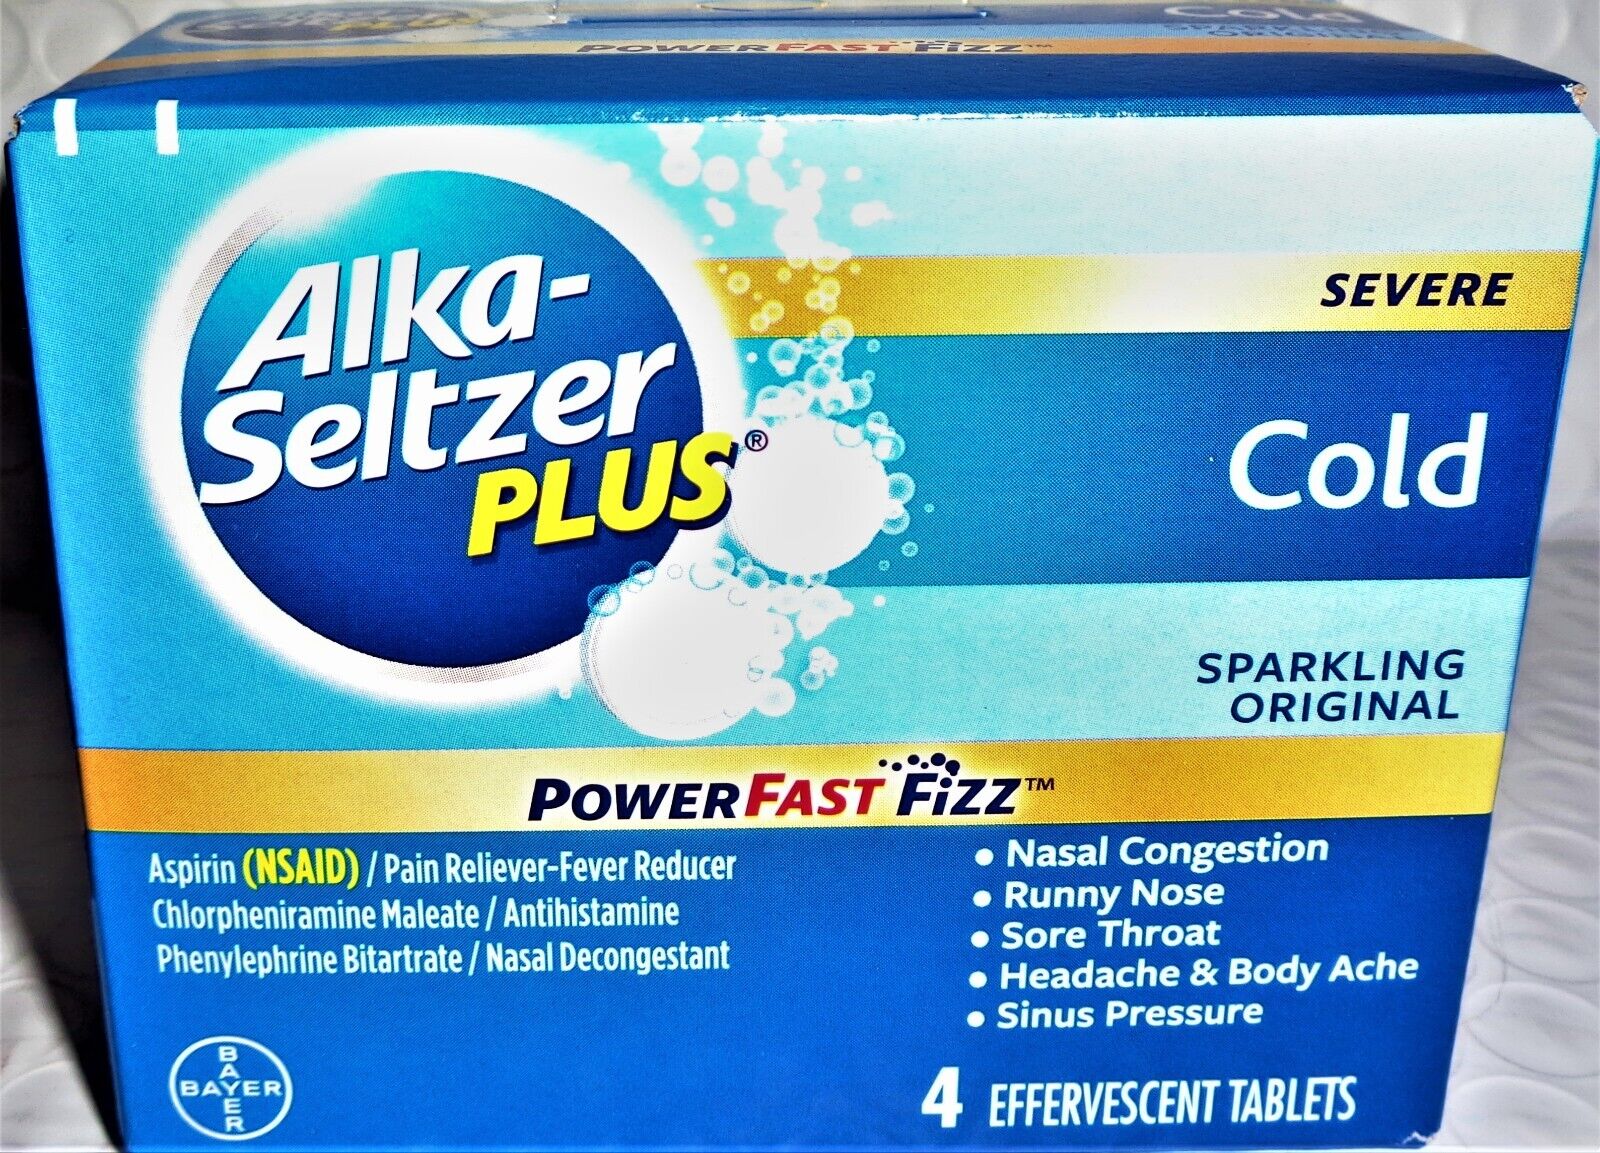 BAYER Alka-Seltzer Plus Effervescent Tablets Severe Cold Lot of 1 to 6 (4 Tabs)*